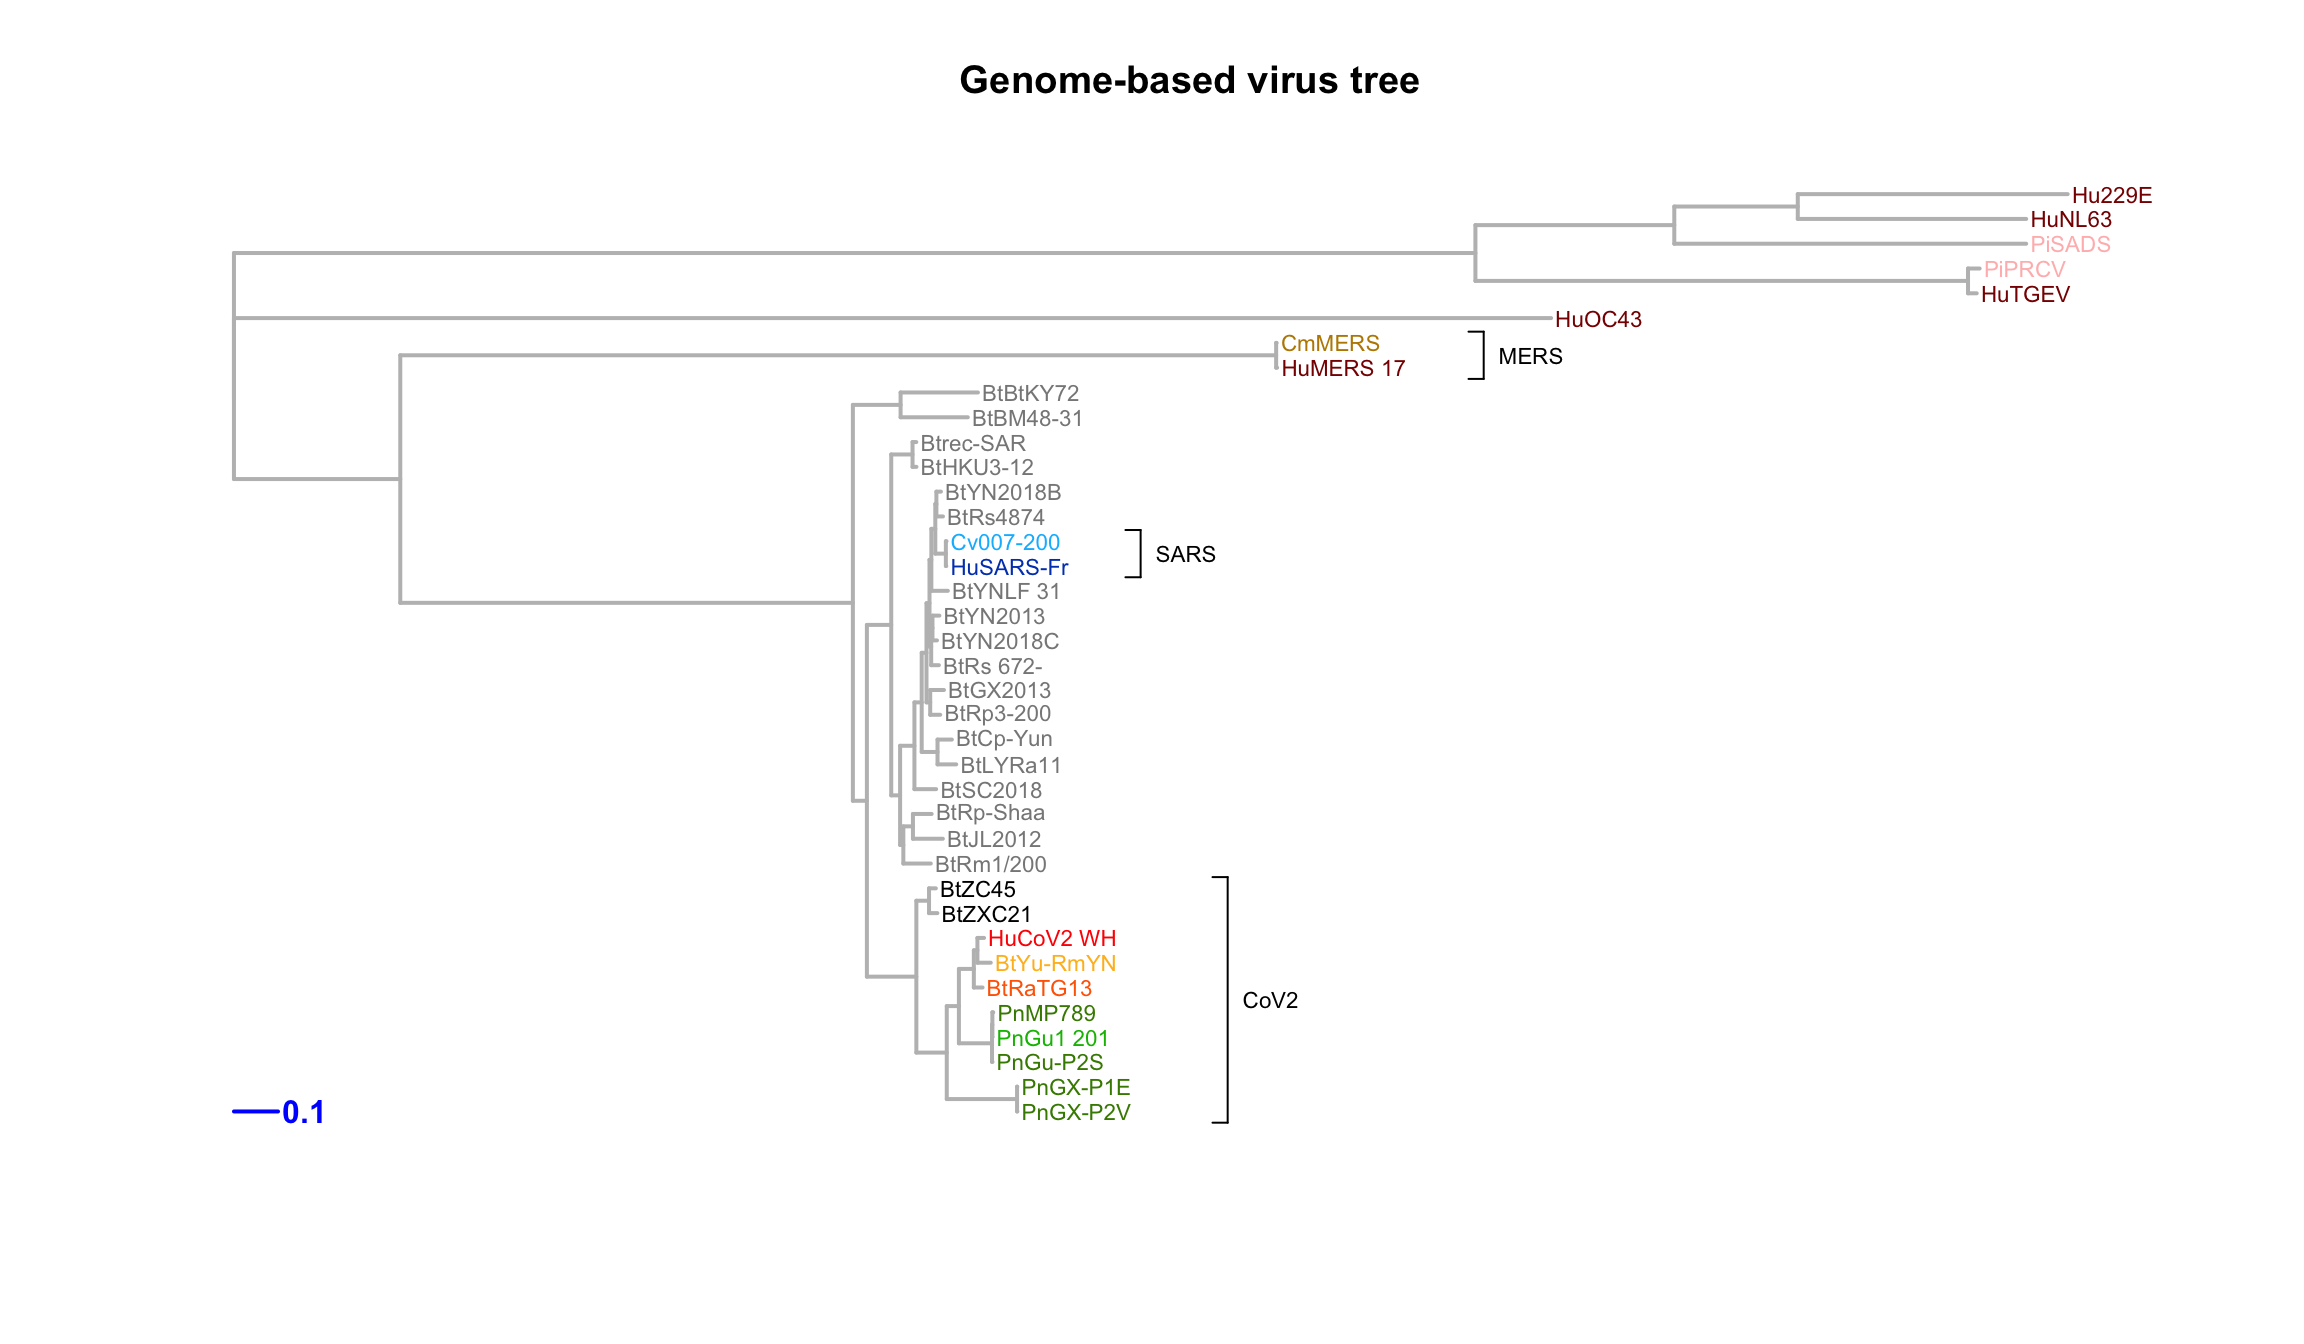 Genome tree of selected coronaviruses.  The tree was inferred by maximum likelihood apprroach (PhyML) based on a progressive multiple alignment (clustalw). 